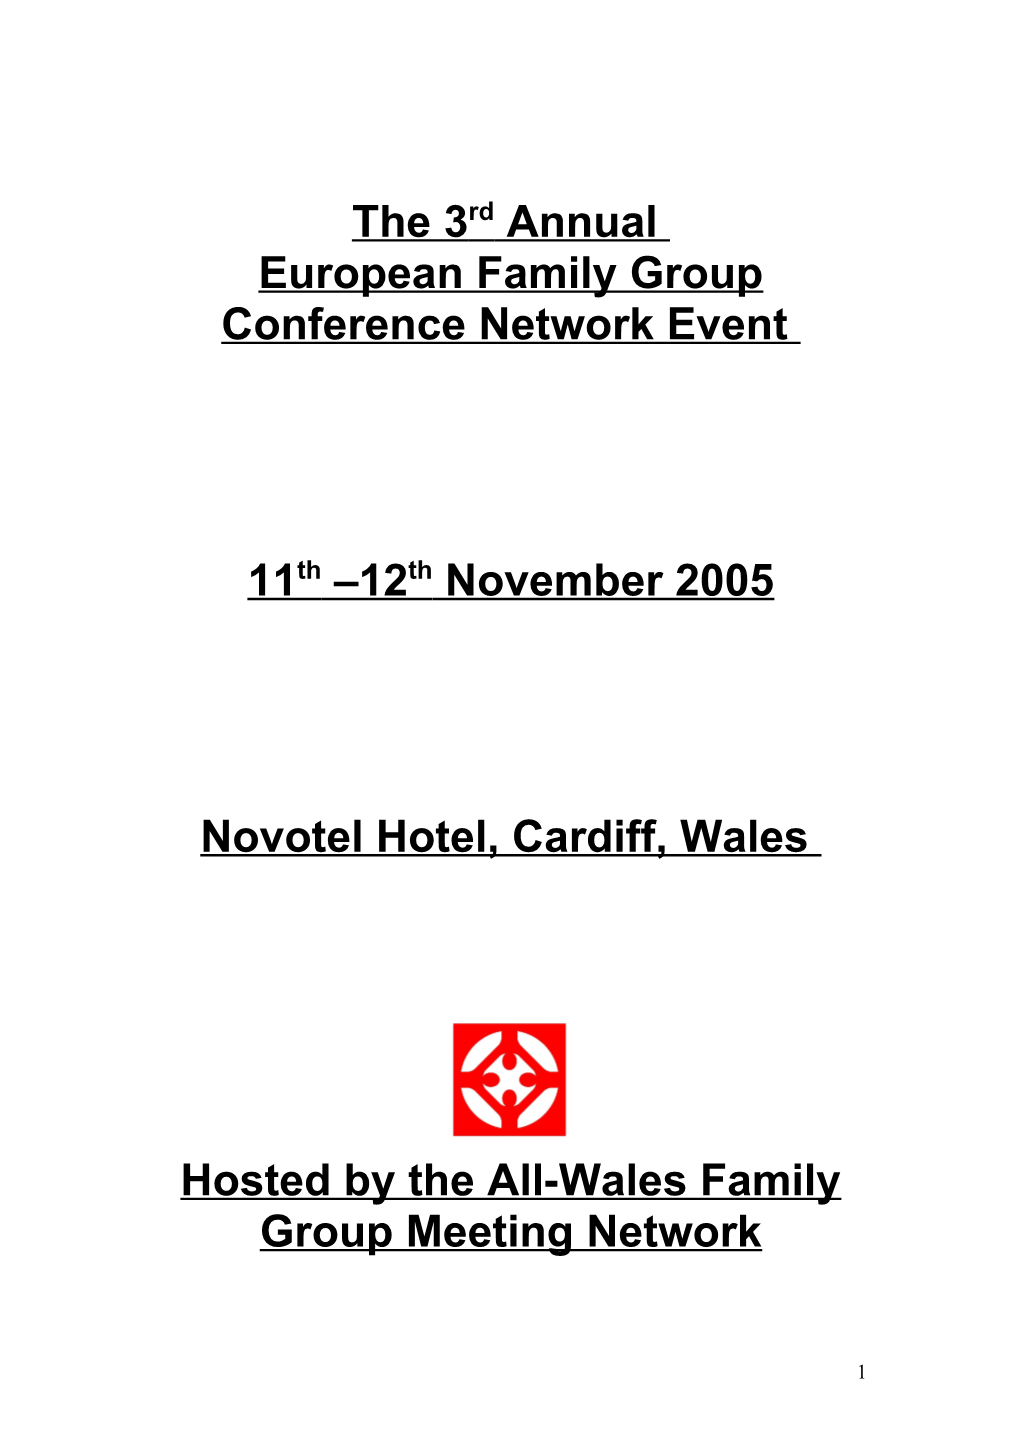 European Family Group Conference Network Event